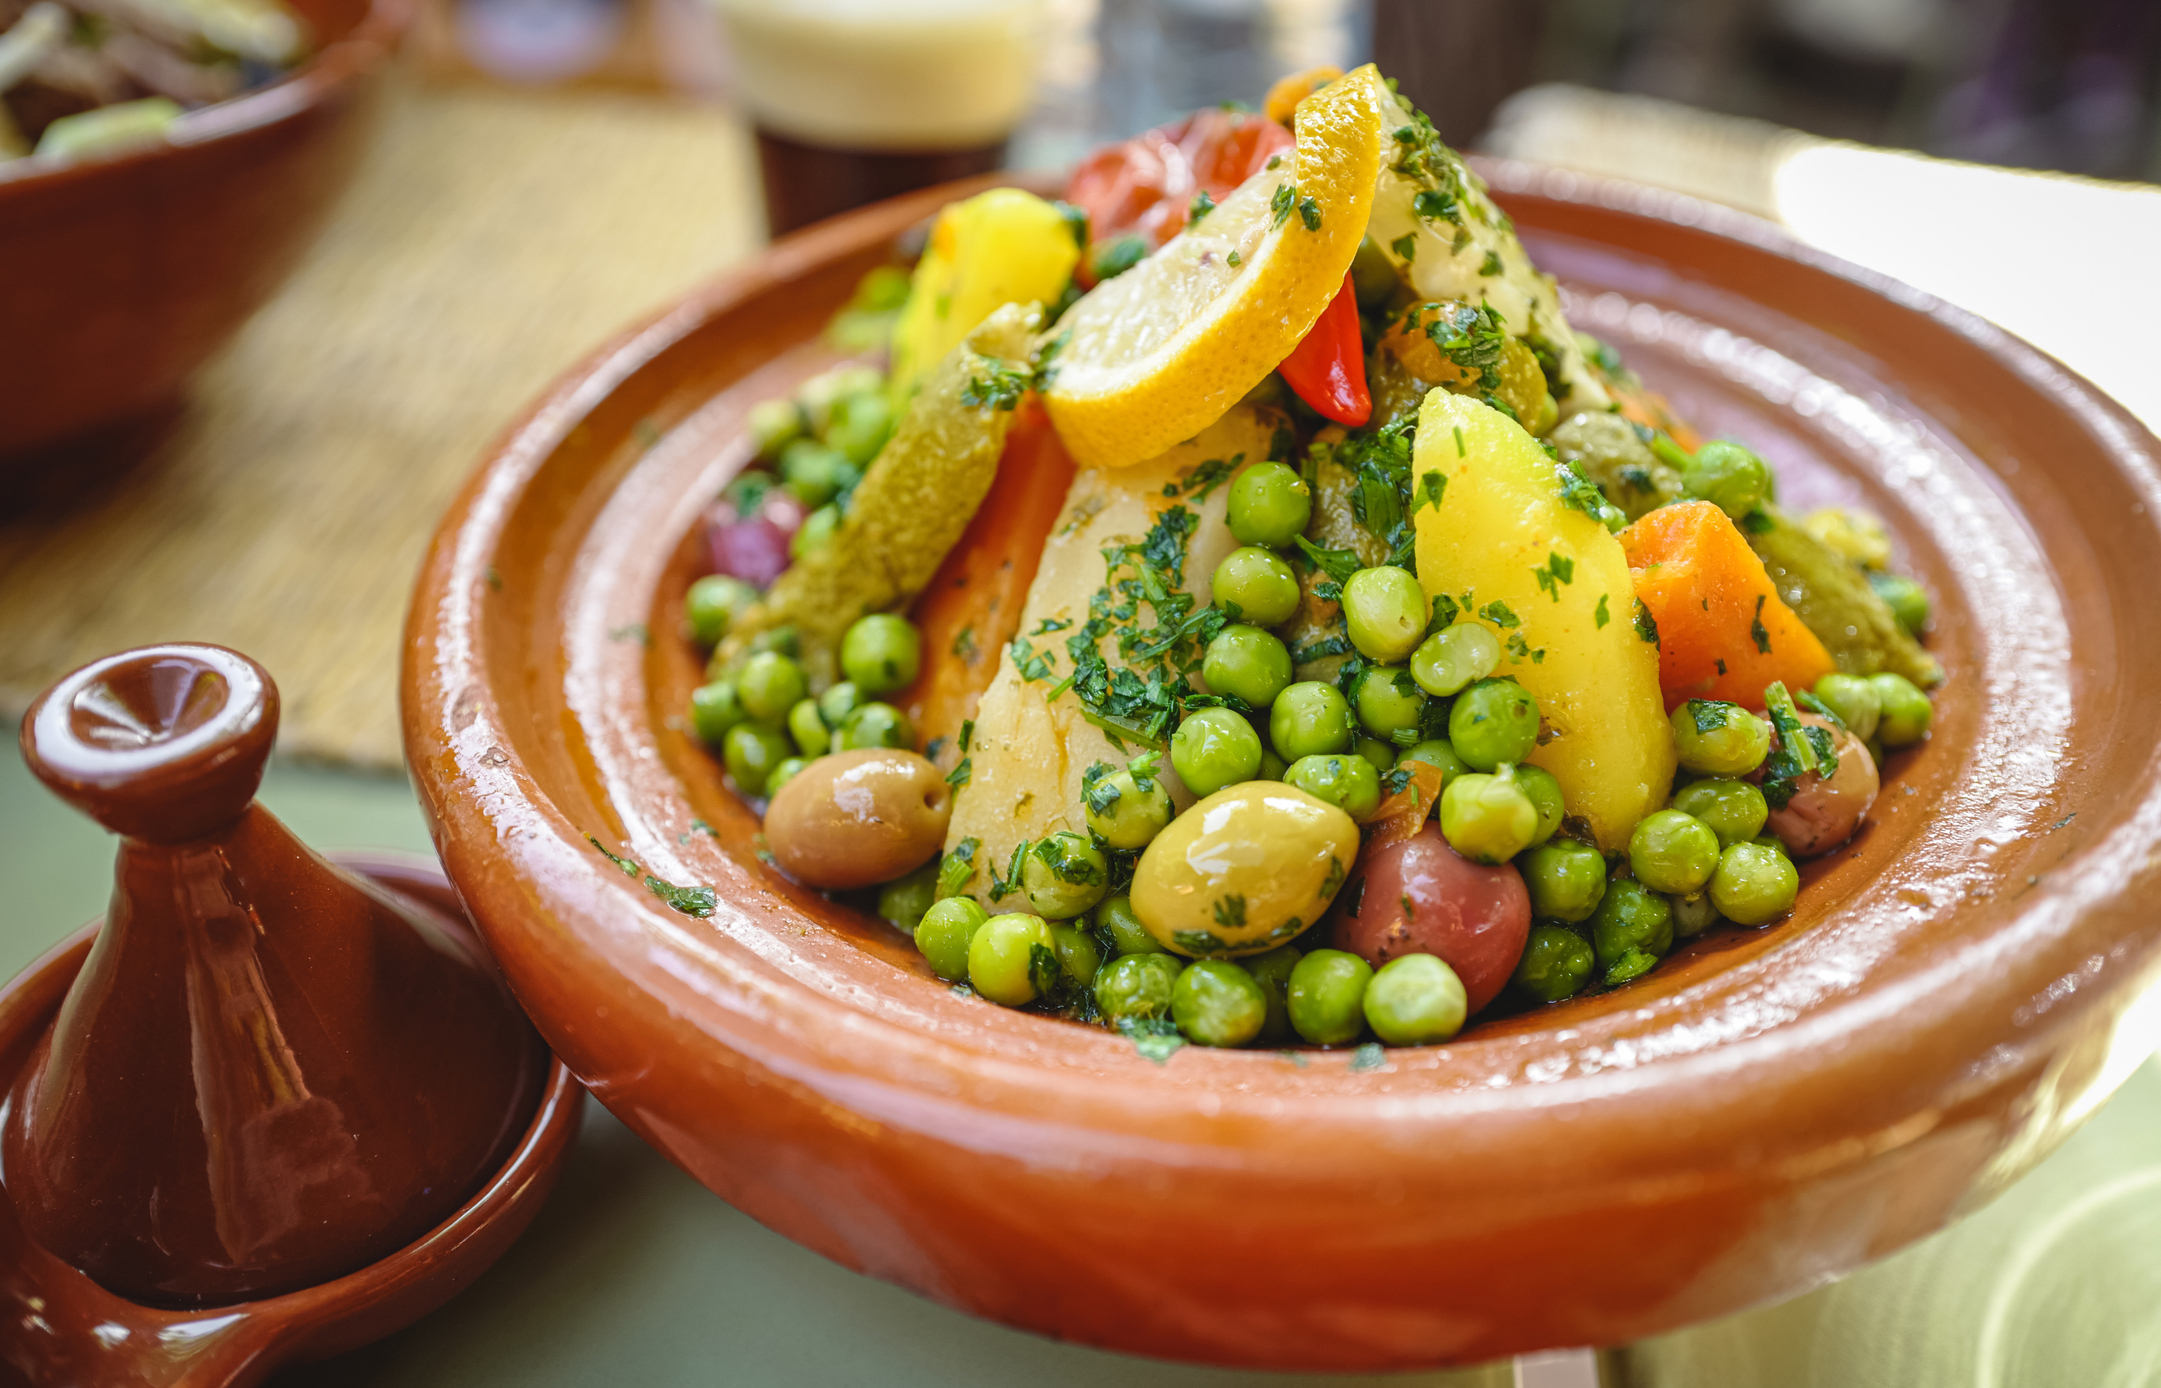 Traditional Moroccan tagine with vegetables and garnish on a table